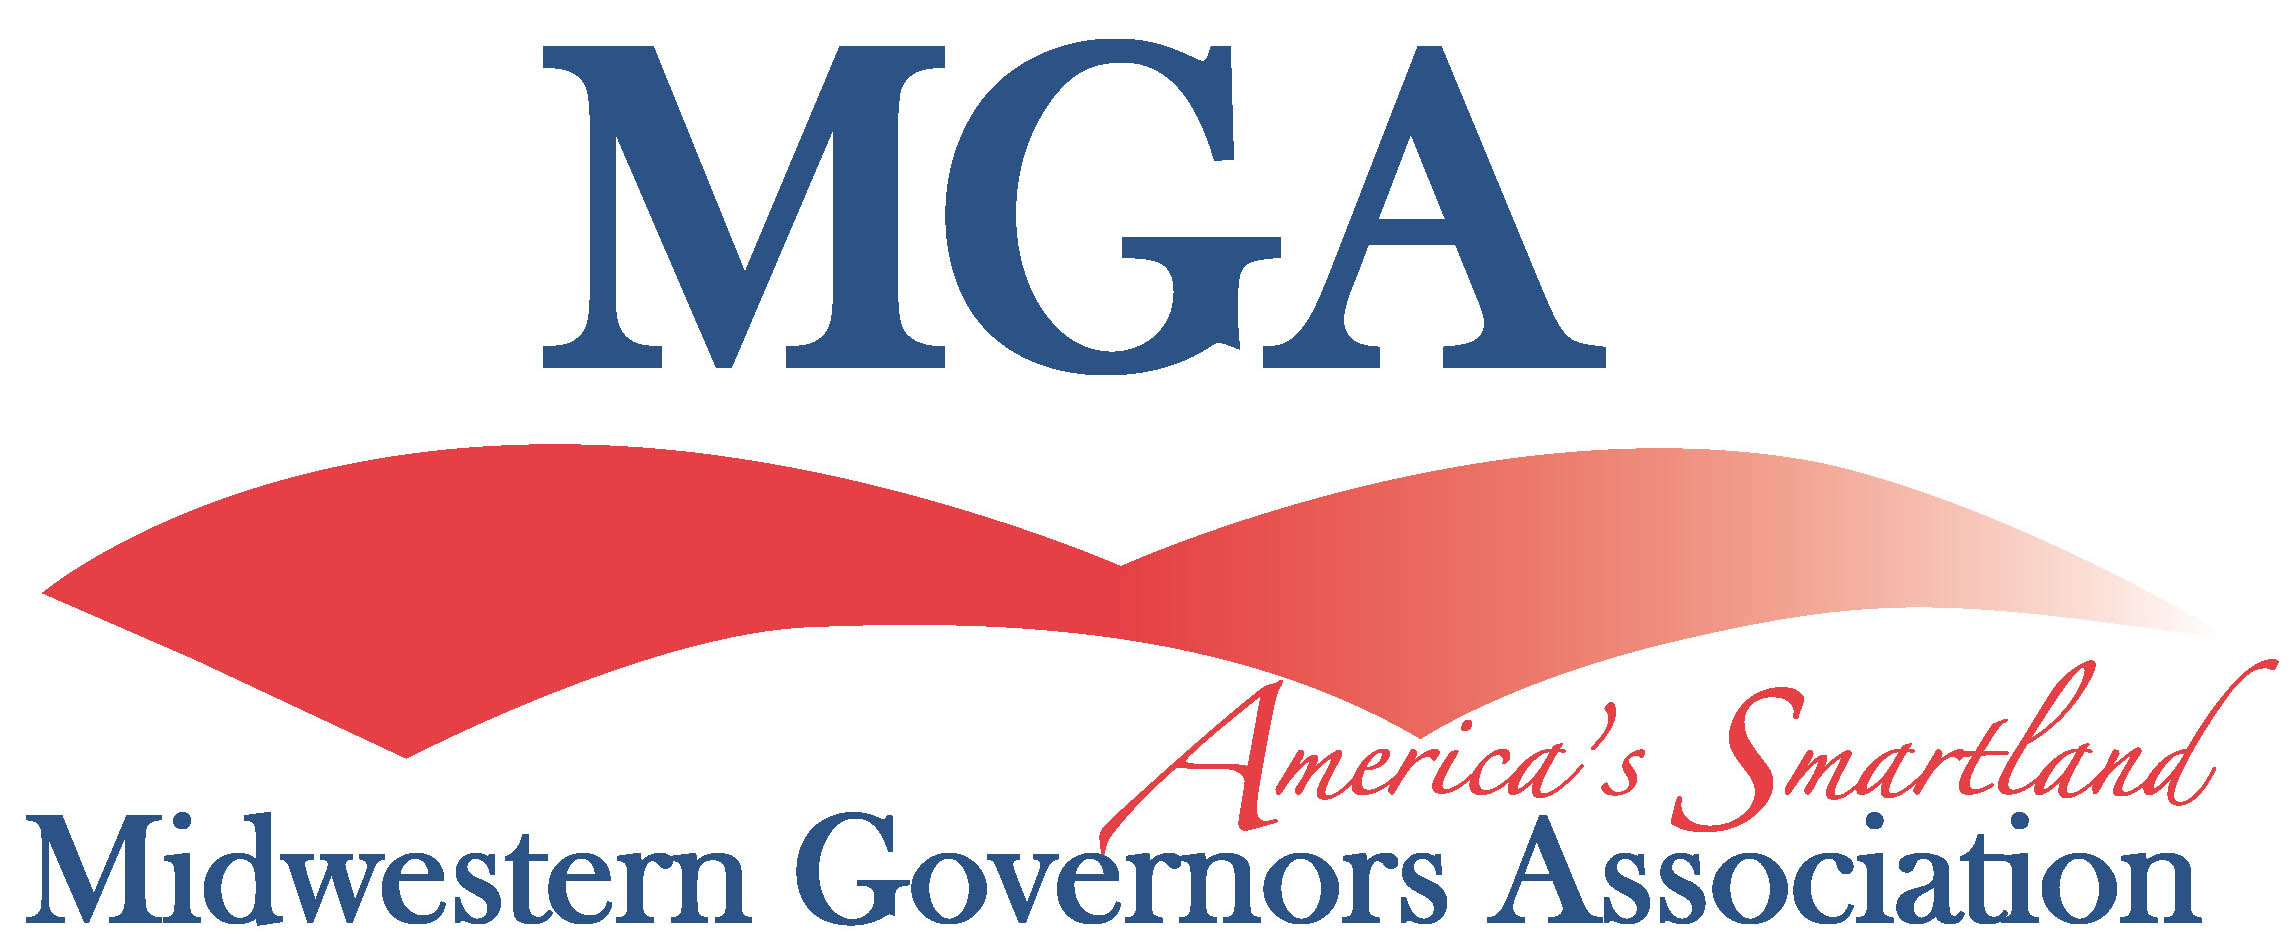 Midwestern Governors Association